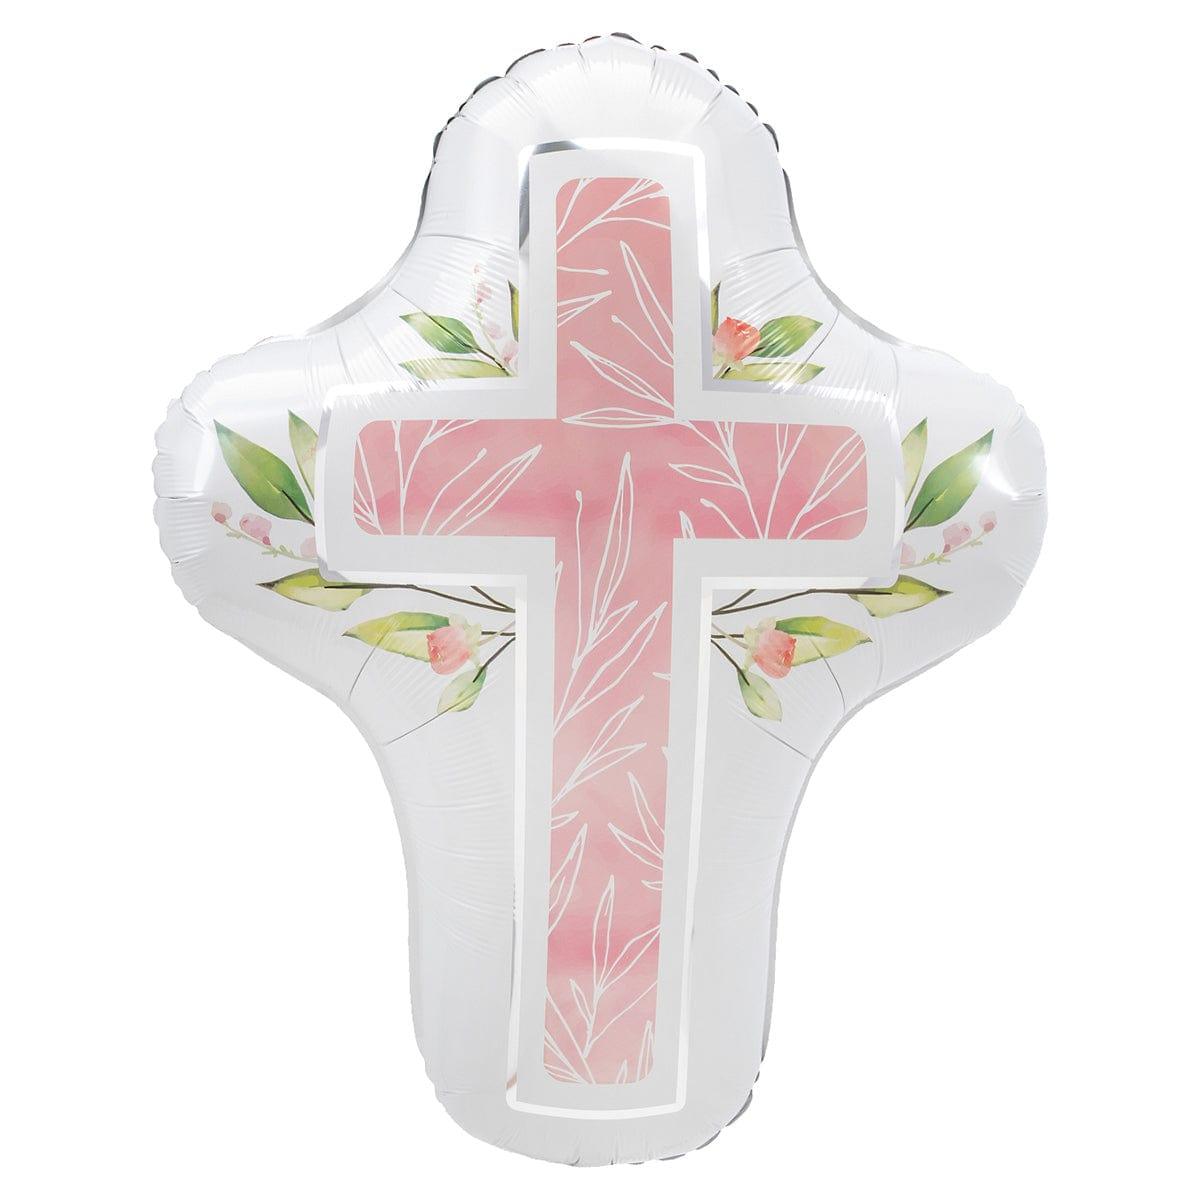 LE GROUPE BLC INTL INC Balloons First Communion Supershape Foil Balloon, 28 in, Pink